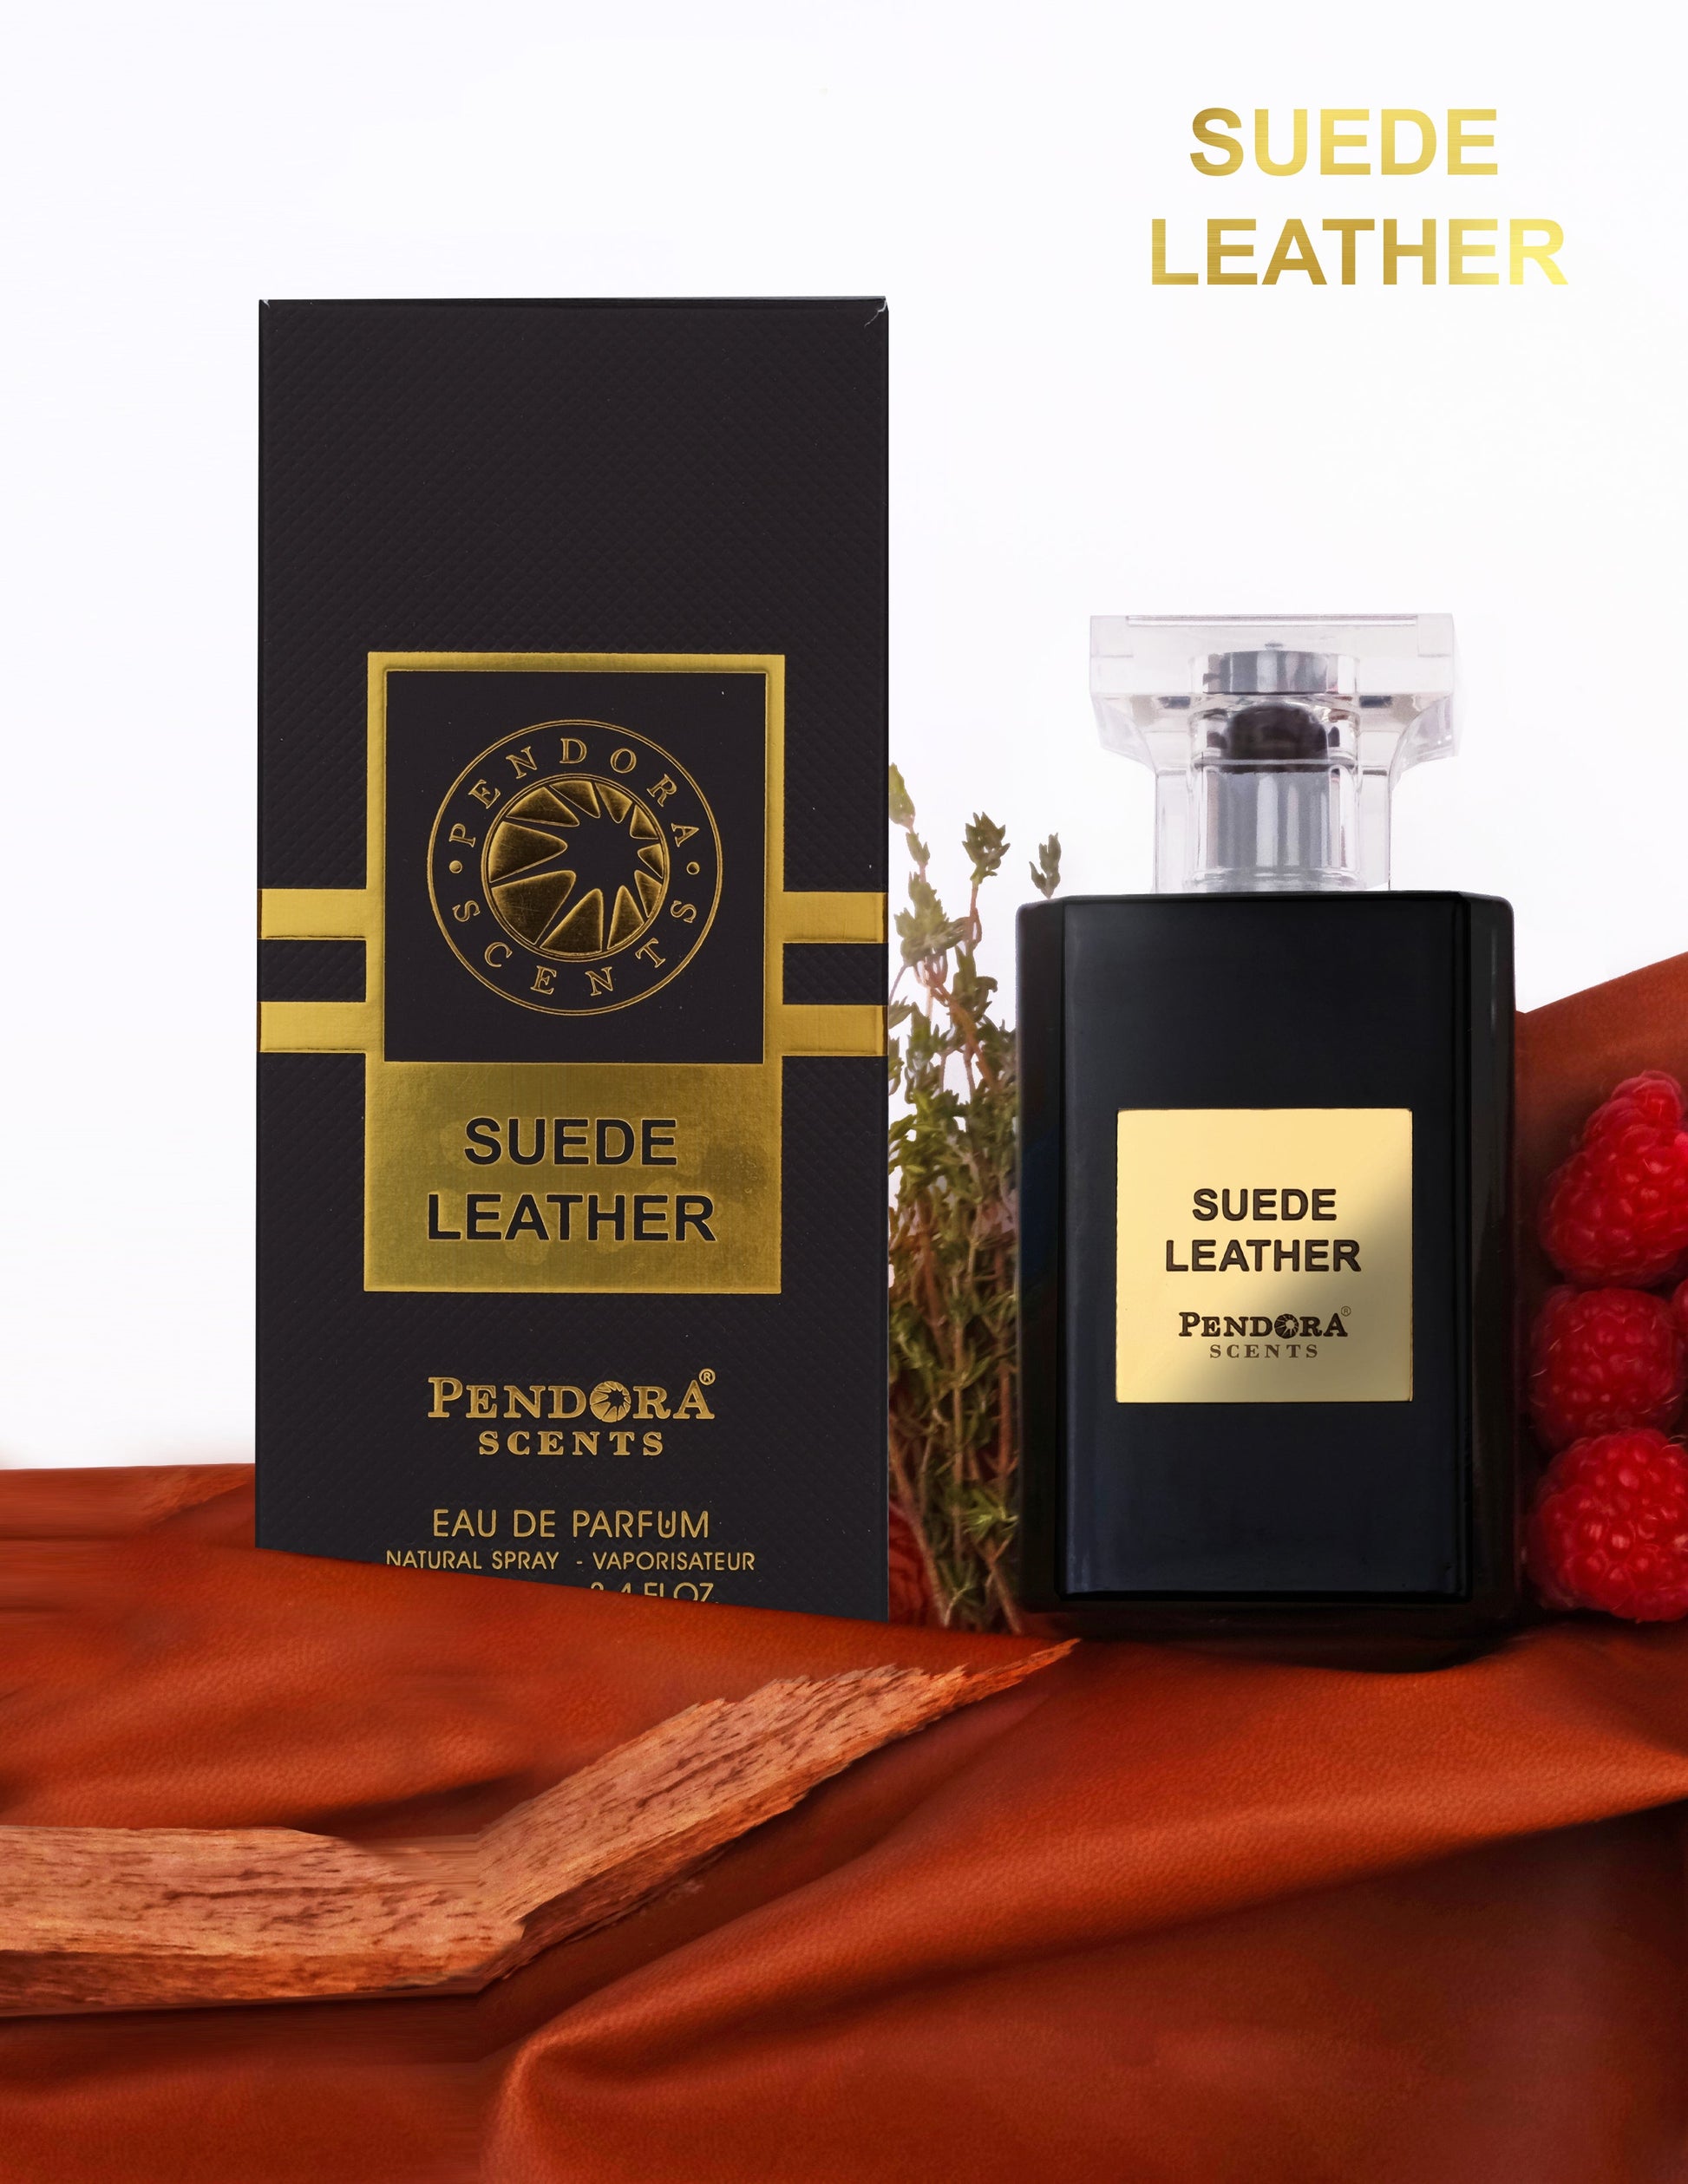 Suede Leather - leather fragrance